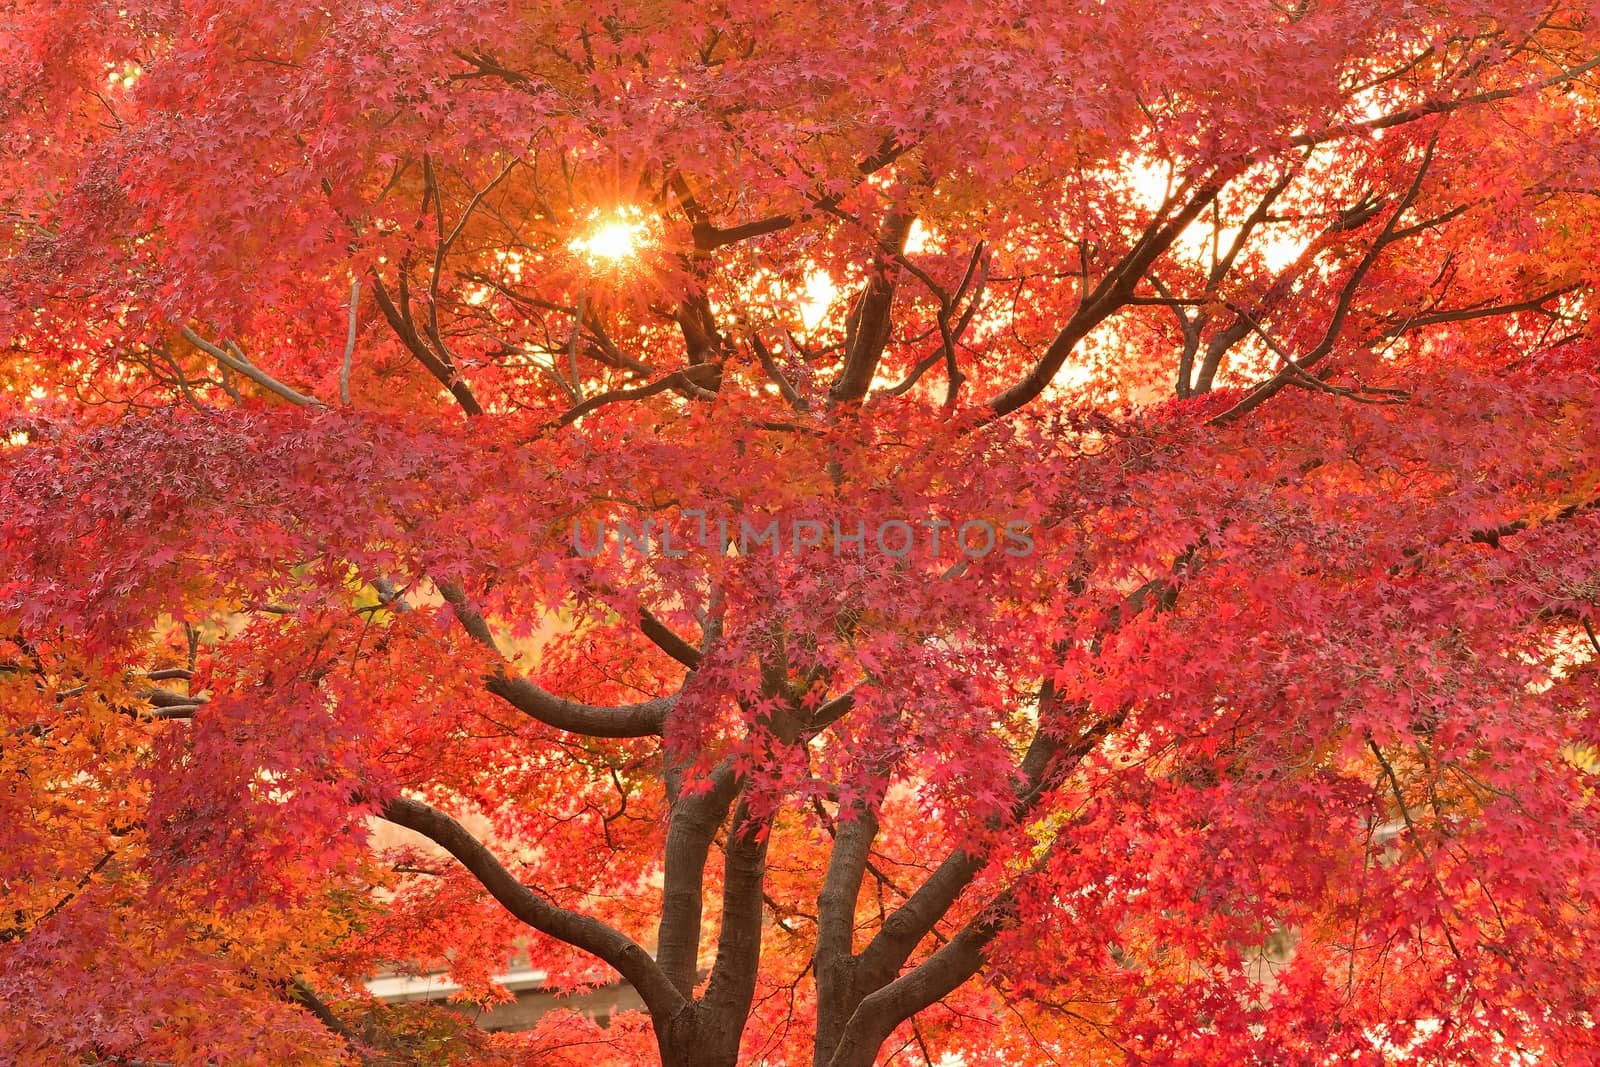 Landscape of Japanese Autumn Maple leaves with sunshine in horizontal frame